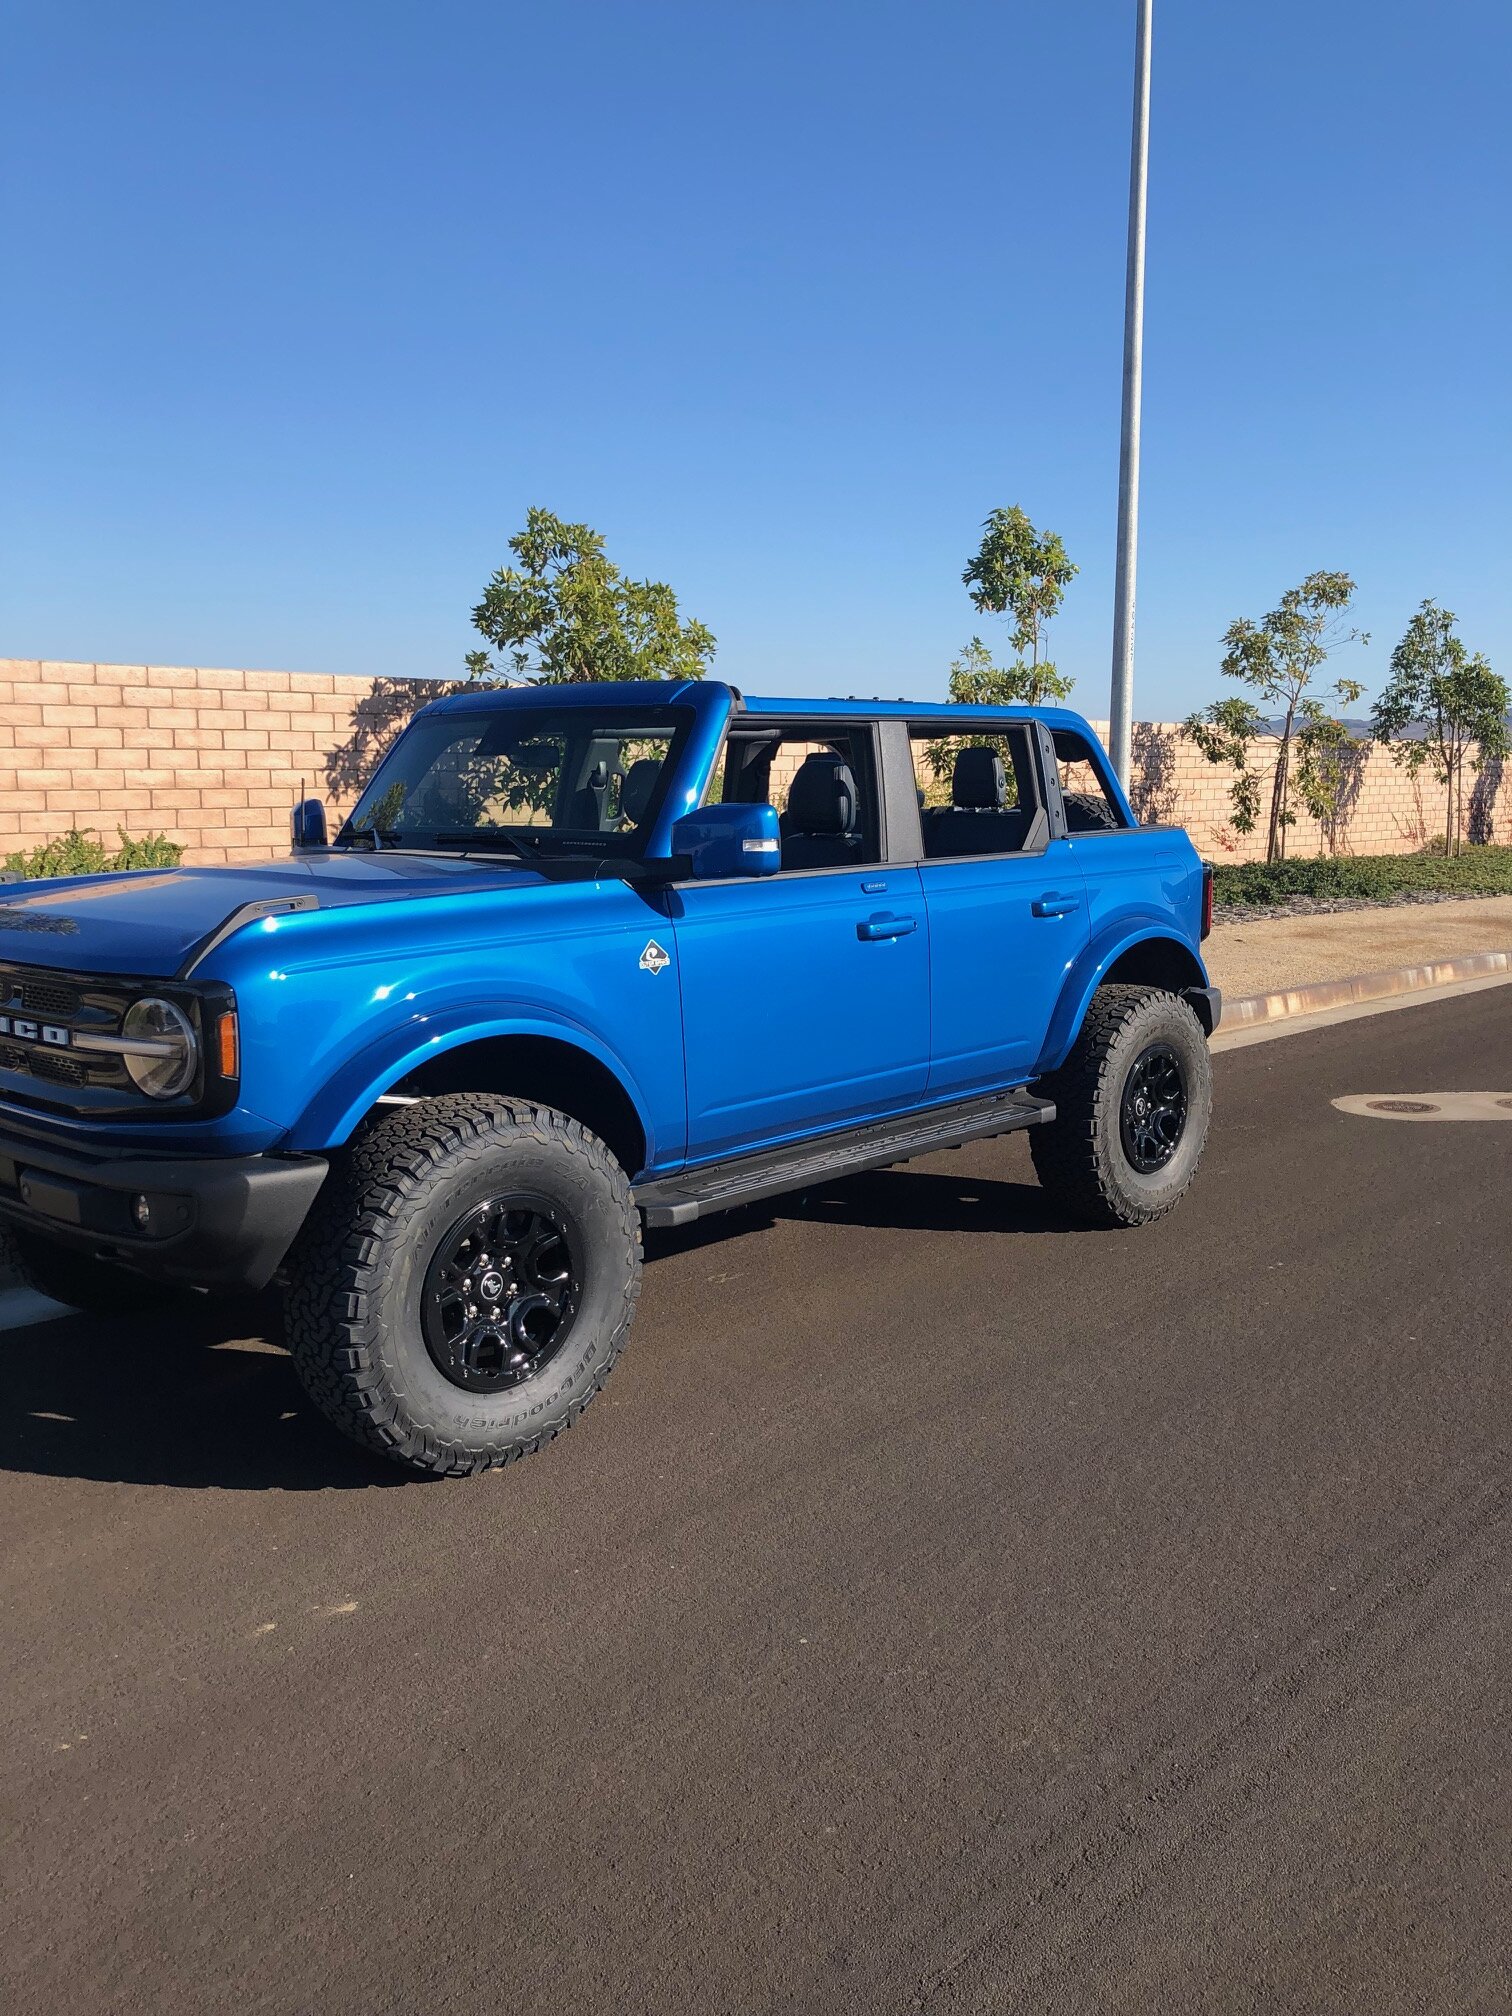 Ford Bronco Bilstein 6112 suspension kit installed…WOW!  HUGE improvement over stock OBX Hitachi coilovers bffc1a5d-0c88-43e8-9bca-00bf80042e39-jpe